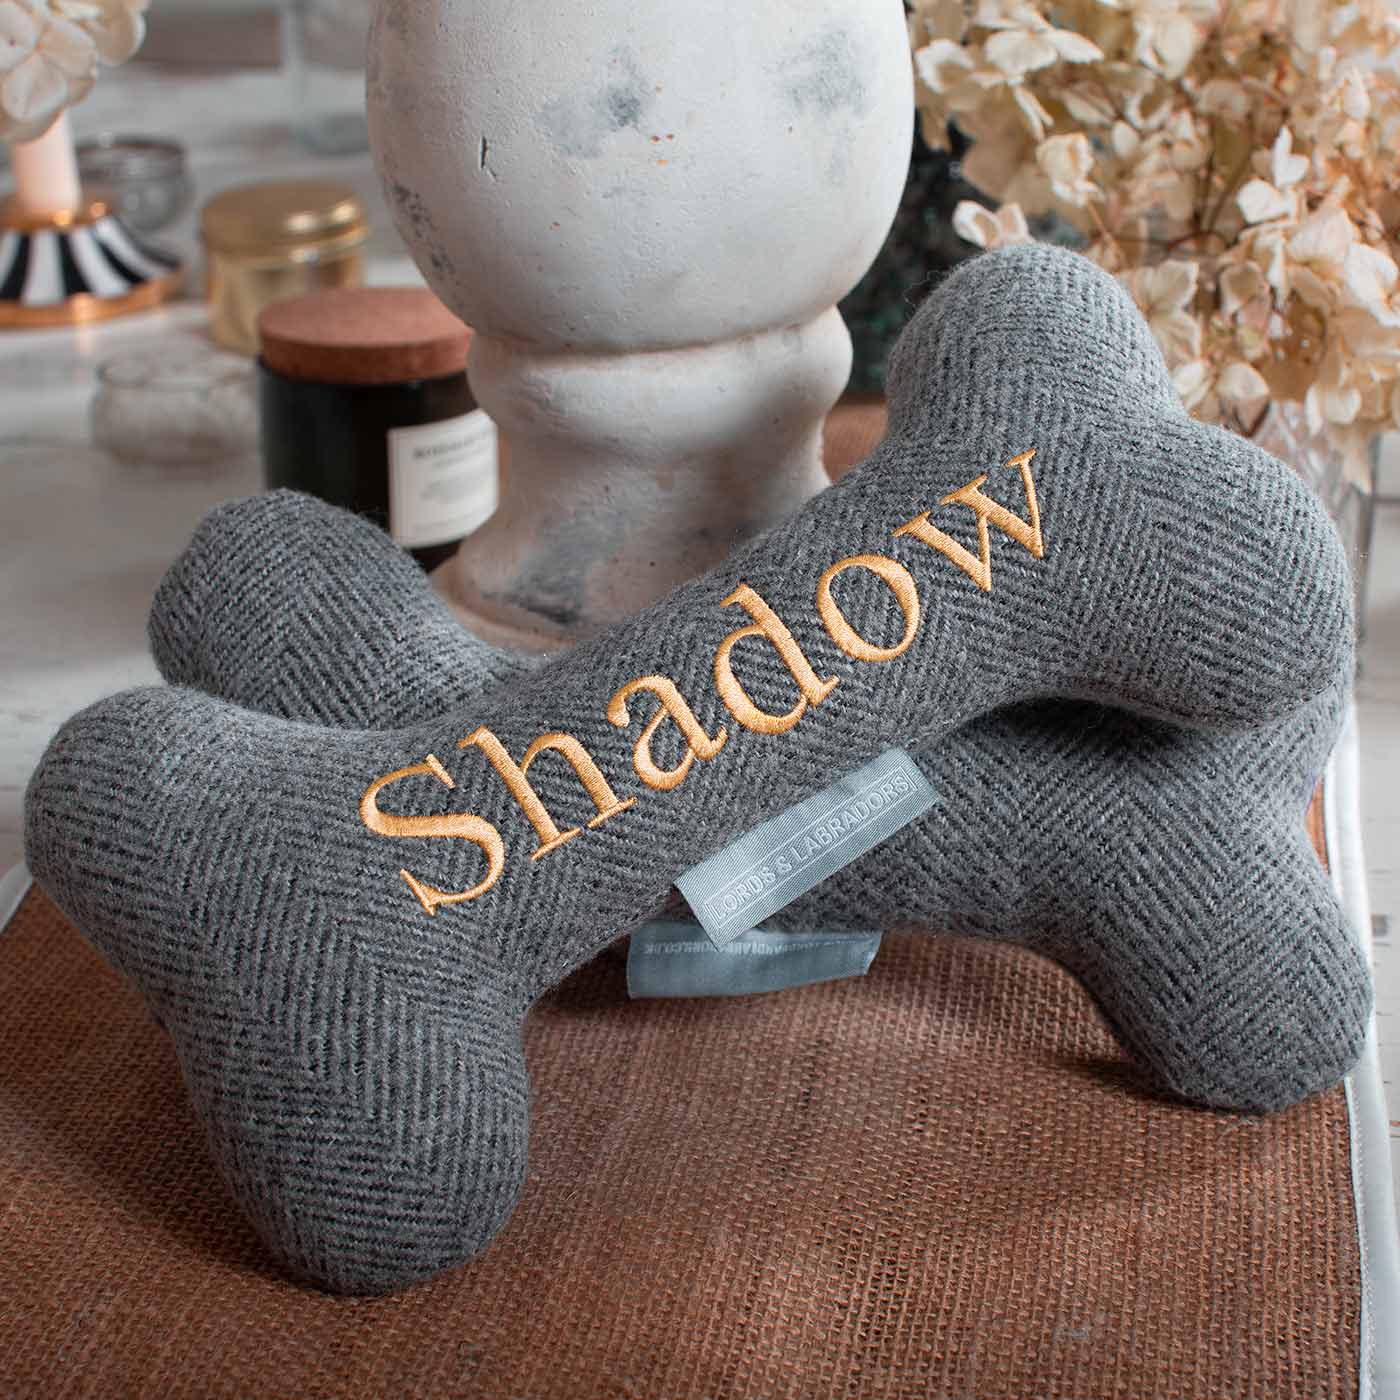 Present The Perfect Pet Playtime With Our Luxury Dog Bone Toy, In Stunning Pewter Herringbone Tweed! Available To Personalise Now at Lords & Labradors 